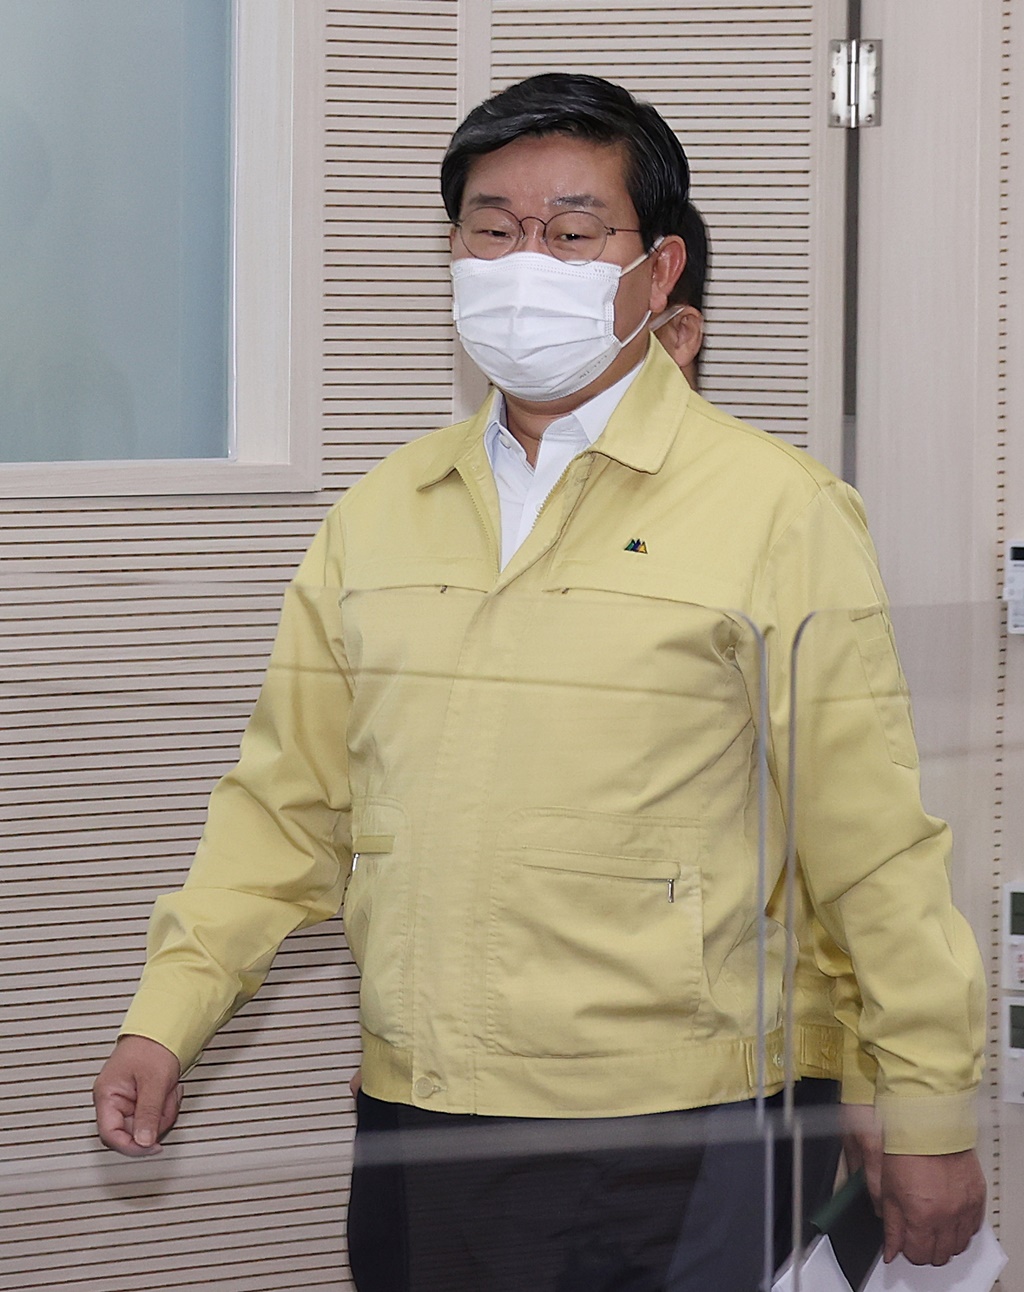 Interior and Safety Minister Jeon Hae-cheol, Vice Head 2 of the Central Disaster and Safety Countermeasures Headquarters (CDSCH), attends a CDSCH meeting on COVID-19 response at the central disaster safety situation room in Government Complex Sejong-2 on December 1.